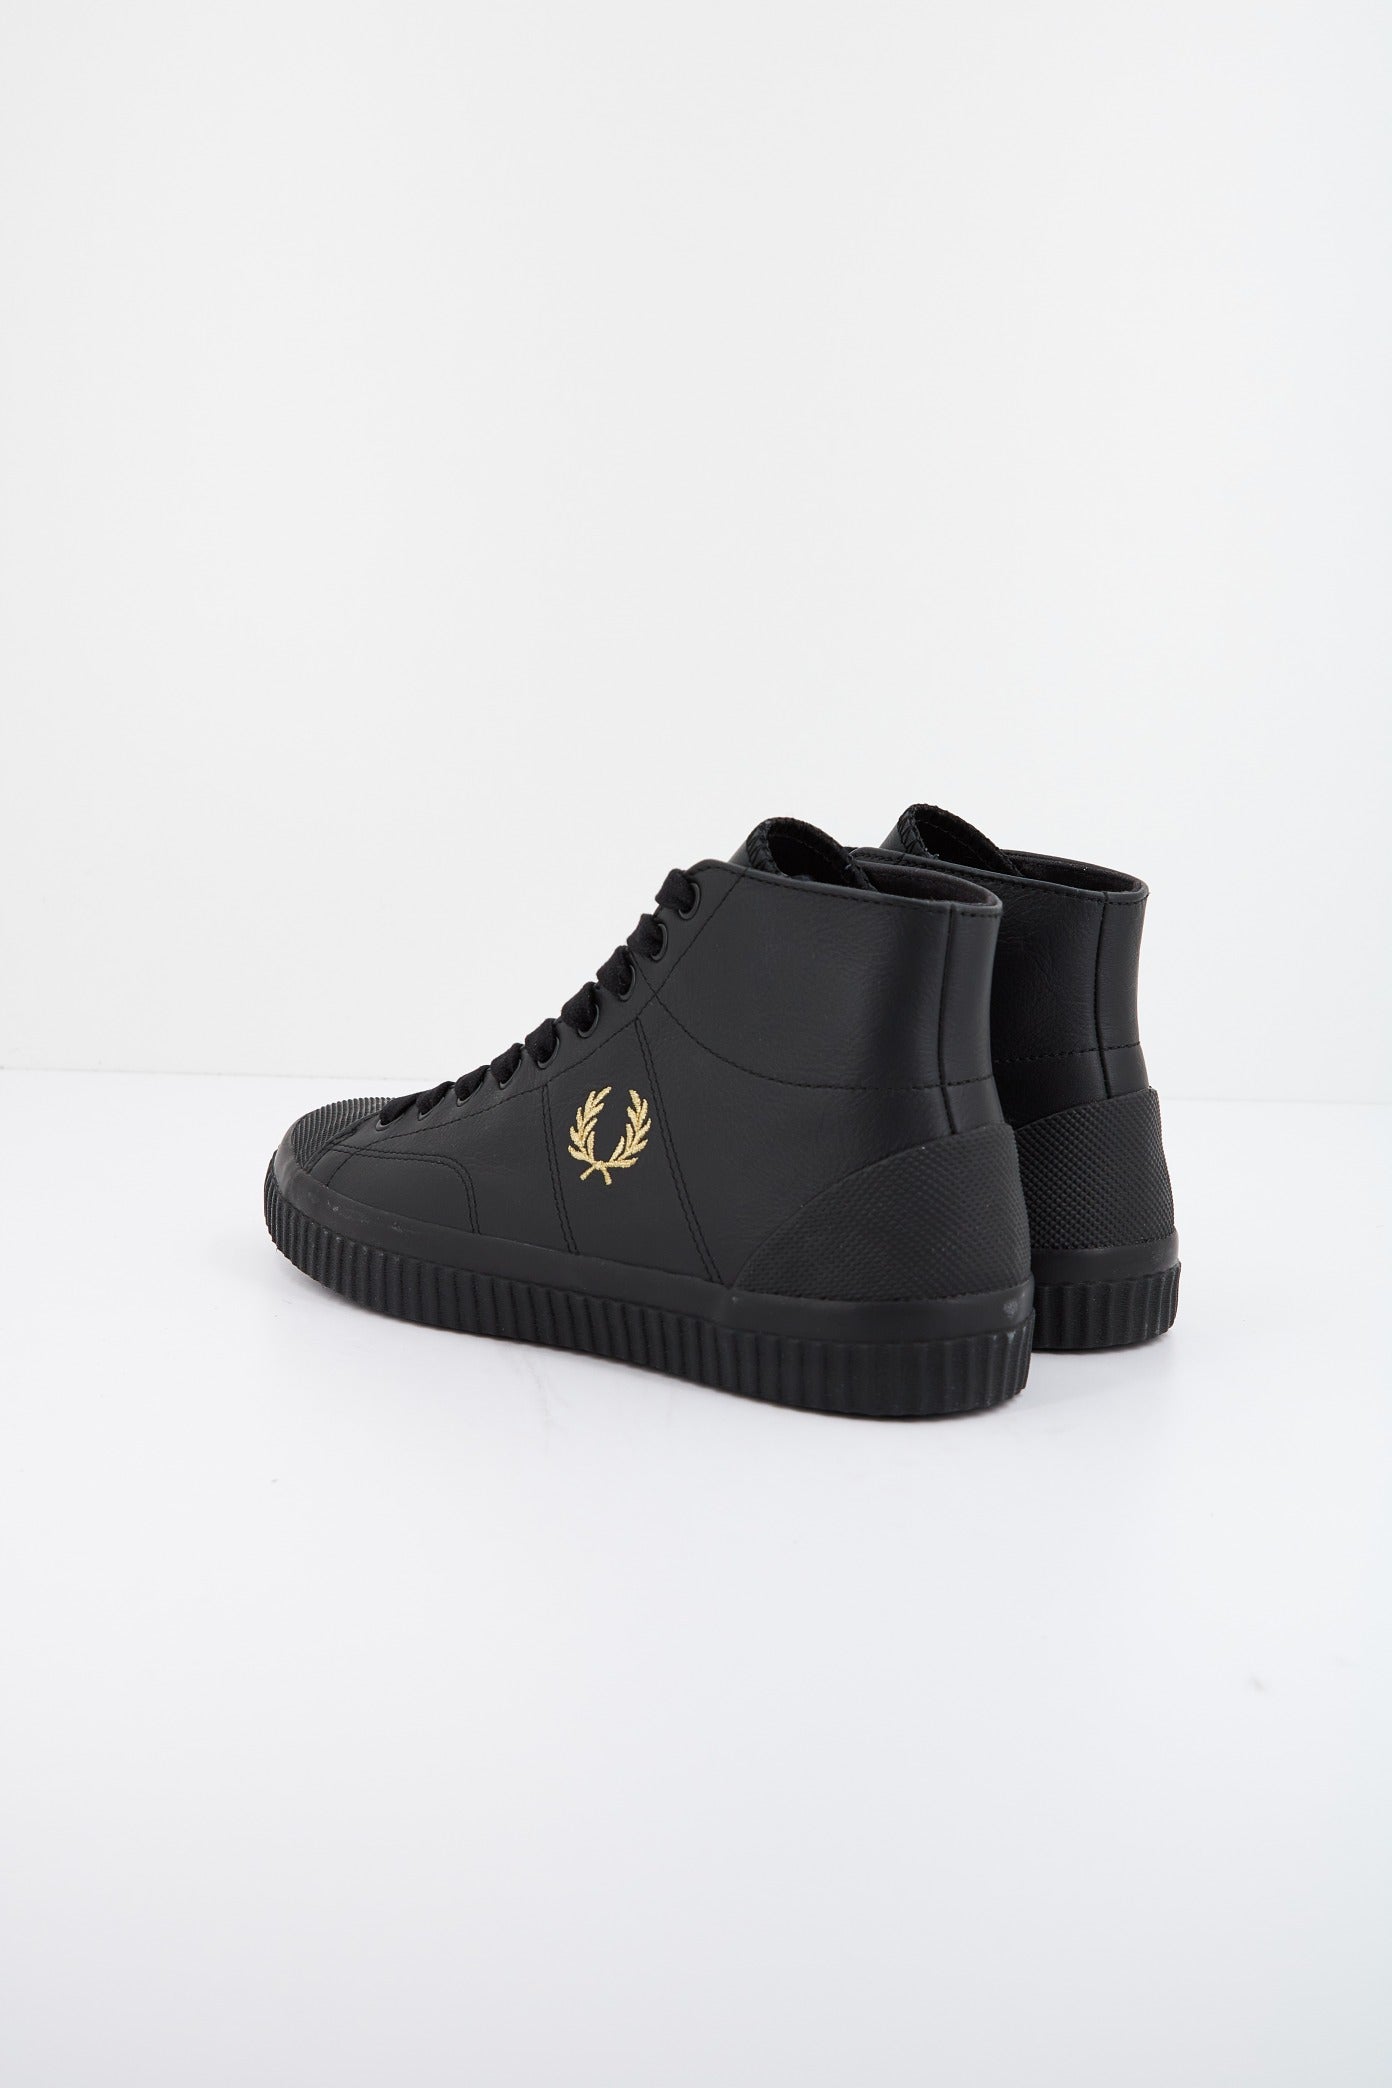 FRED PERRY HUGHES MID LEATHER en color NEGRO  (3)